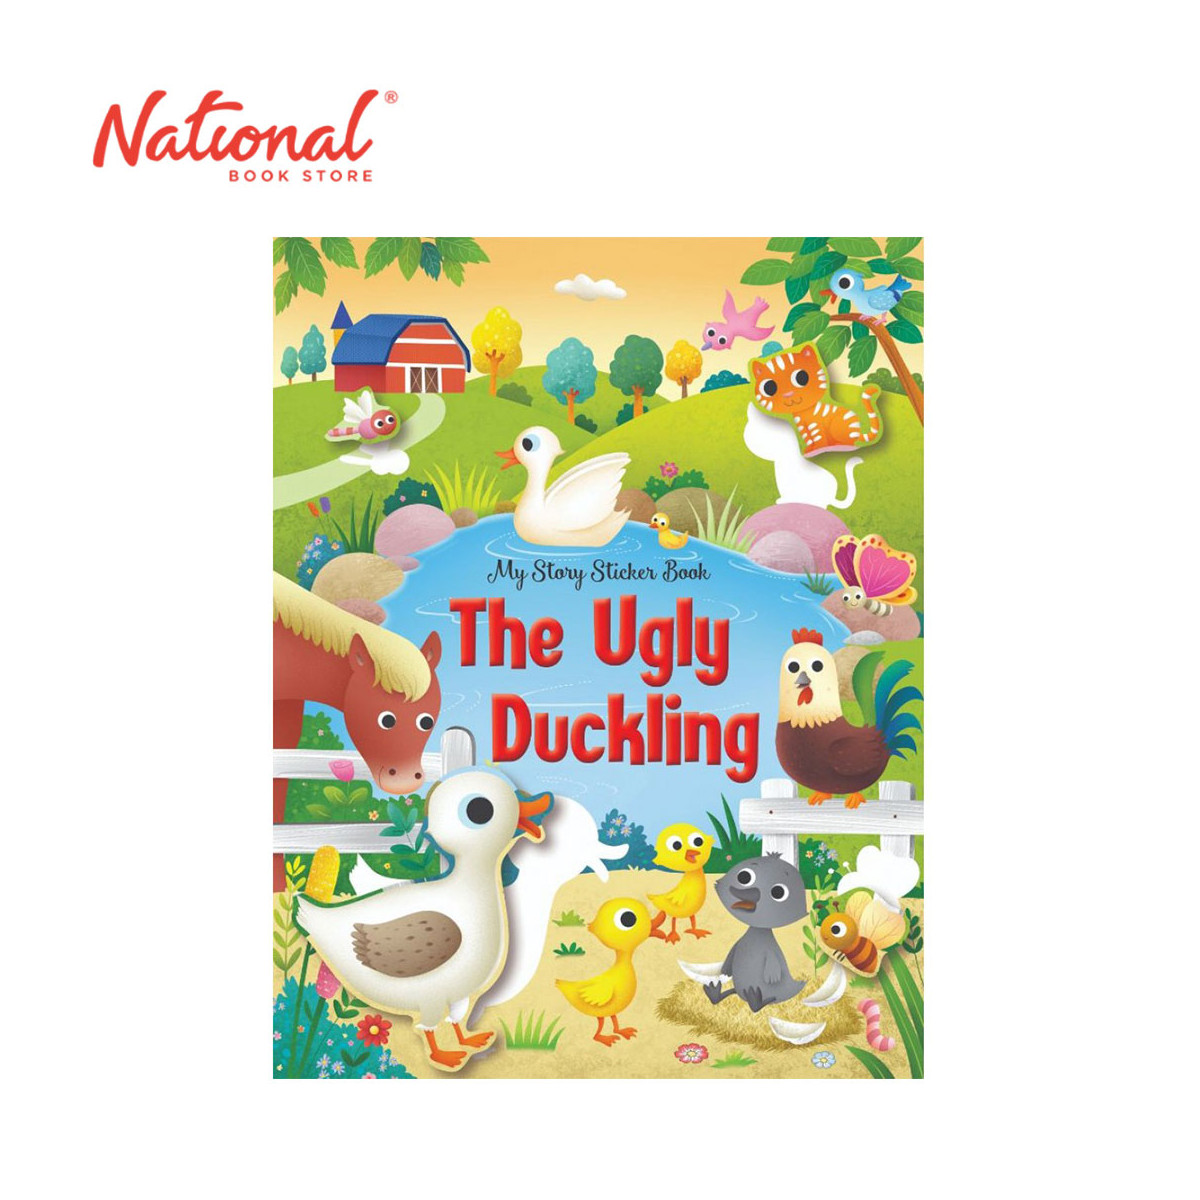 My Story Sticker Book: The Ugly Duckling - Trade Paperback - Storybooks for Kids